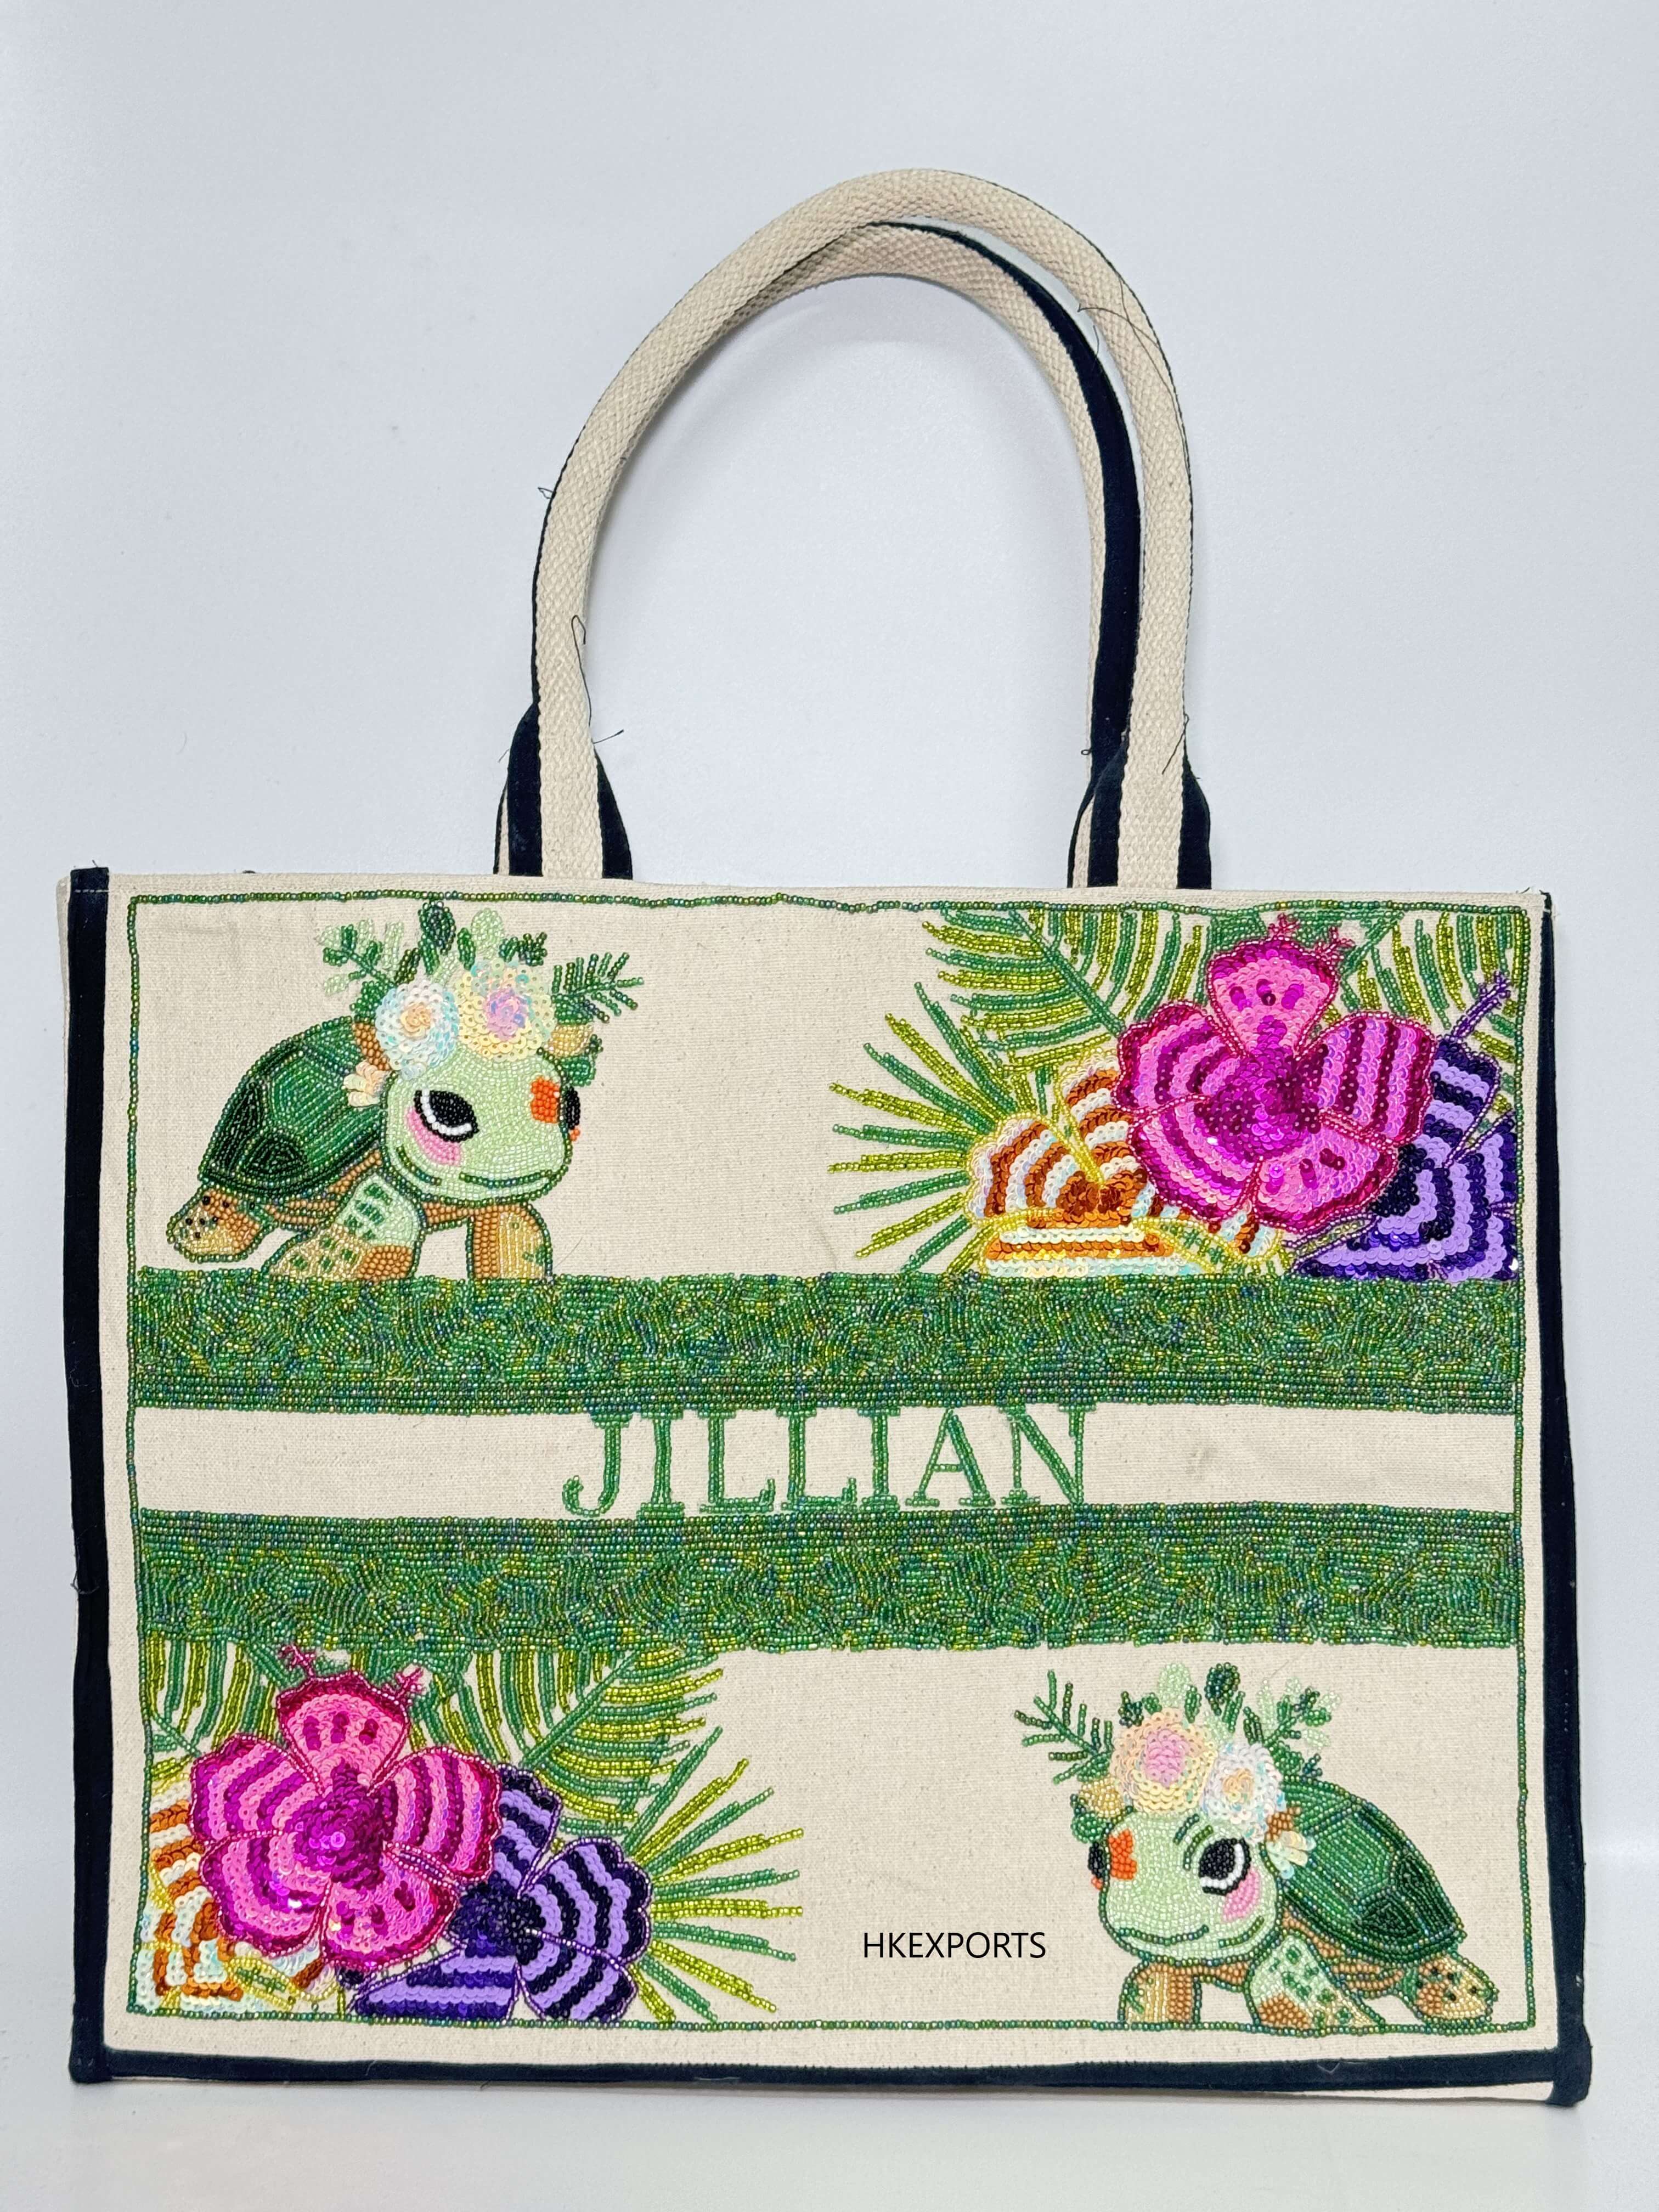 jillian-personalized-sea-turtle-tote-bag-carry-your-style-with-coastal-elegance